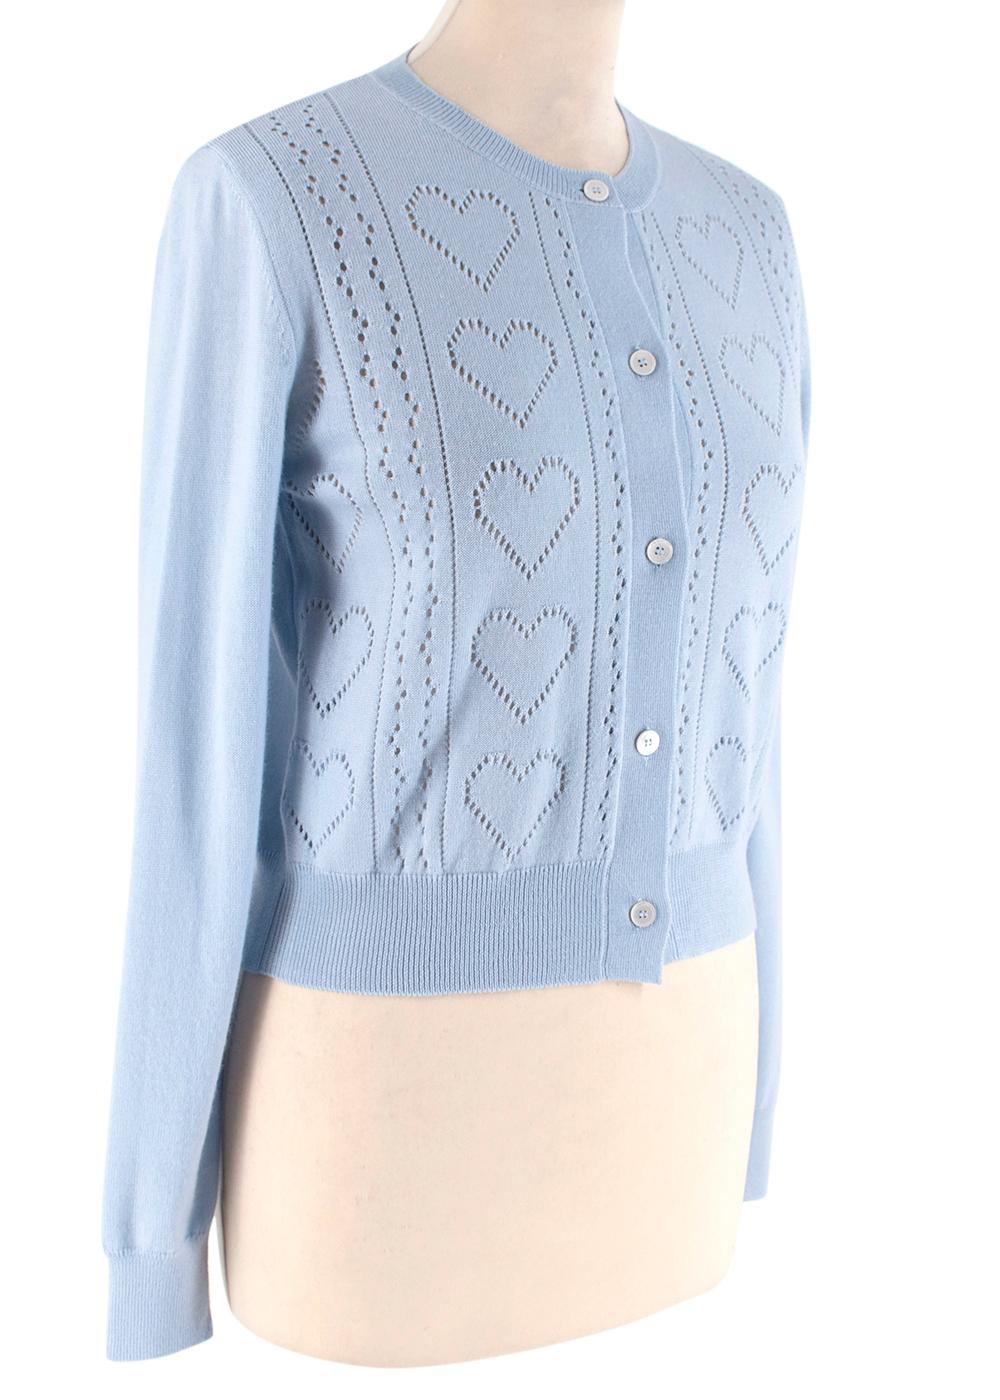 Miu Miu Pointelle-knit Heart Baby Blue Cardigan

- Knitted heart design on the bodice of the cardigan
- Buttoned fastening with thin pearl buttons 
- Ribbed hemlines around the round neckline and cuffs
- Light weight material
- Long sleeves
- Warm